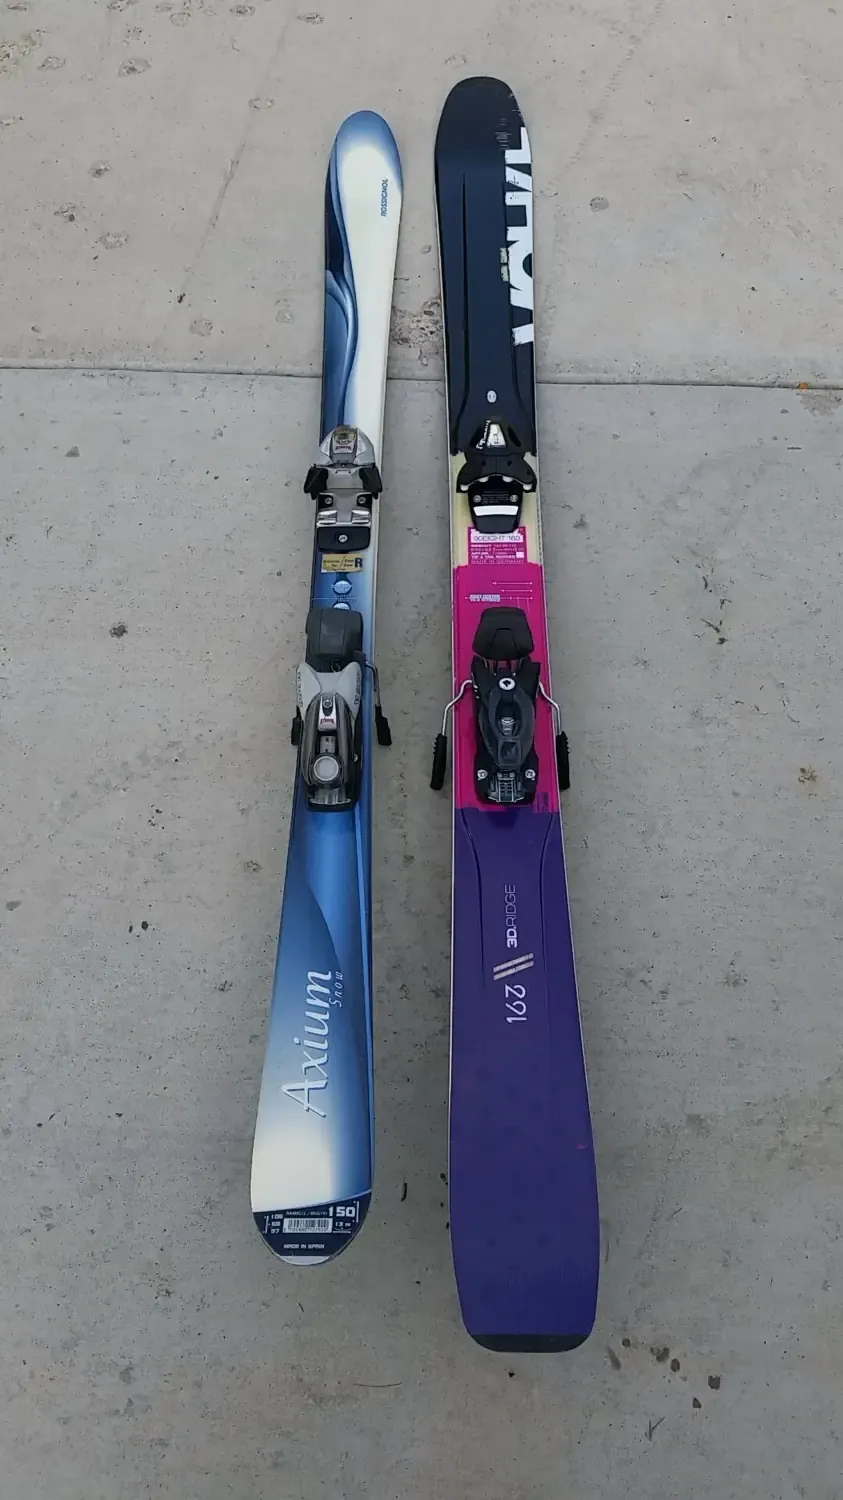 Lindsey's old (left) vs new (right) skis